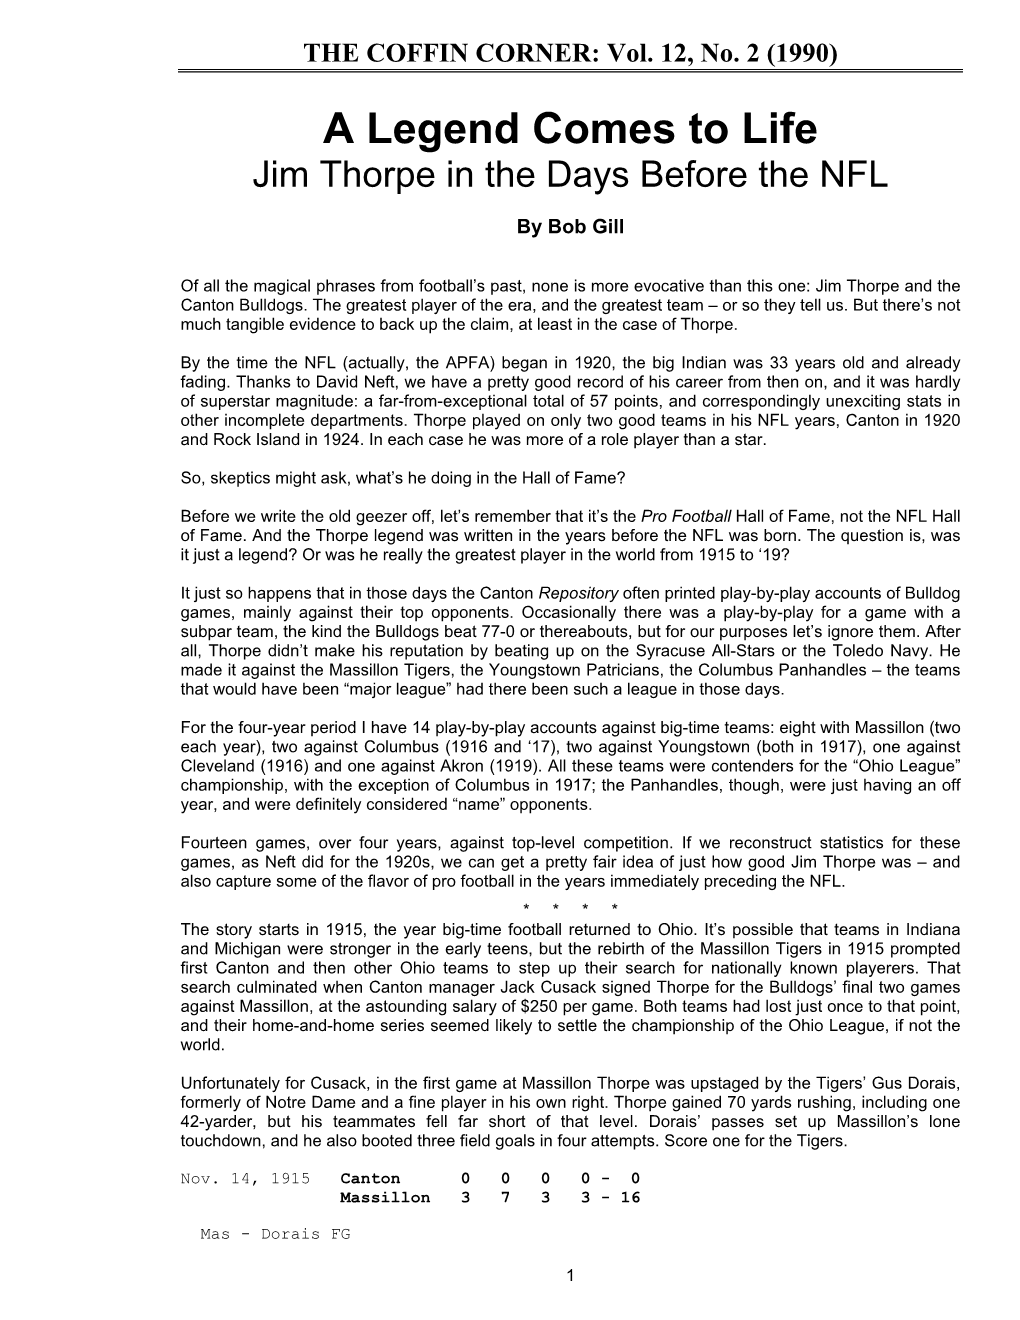 Jim Thorpe in the Days Before the NFL